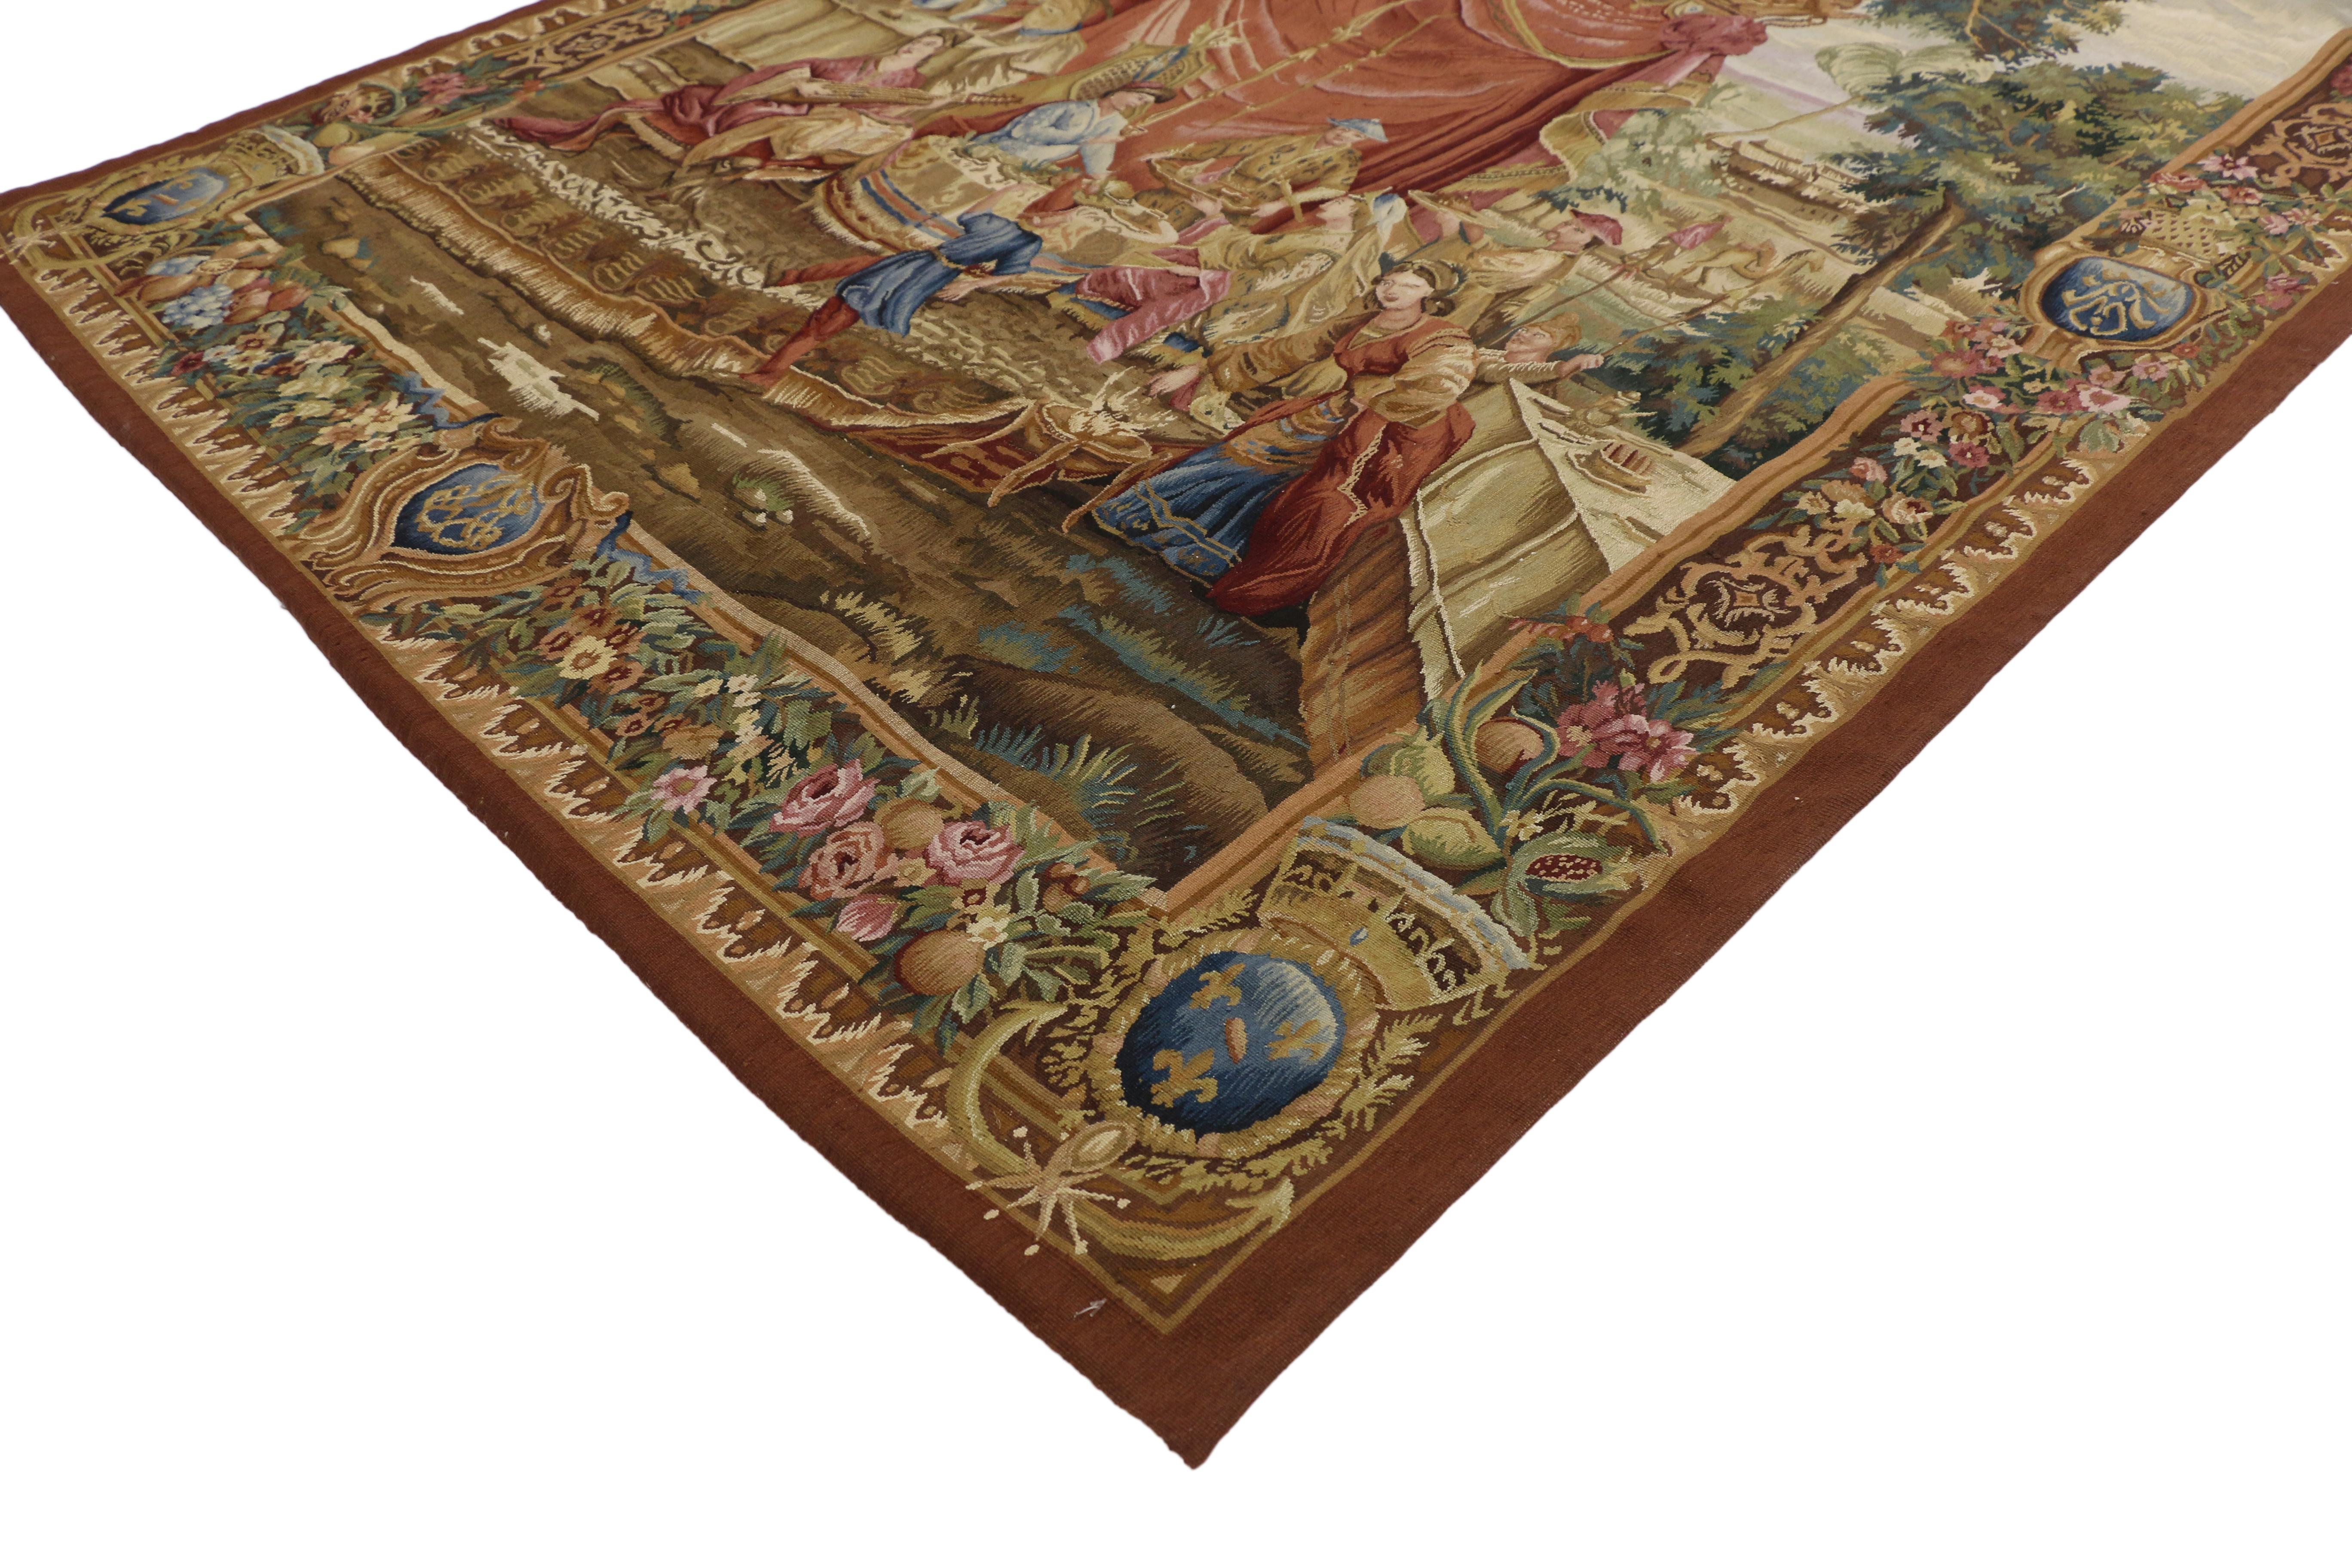 73699 Beauvais French Style Tapestry, The Collation the Story of the Emperor of China 05'00 x 06'07. This handwoven wool French Style tapestry is a reproduction of the Beauvais Tapestry from: The Collation The Story of the Emperor of China.